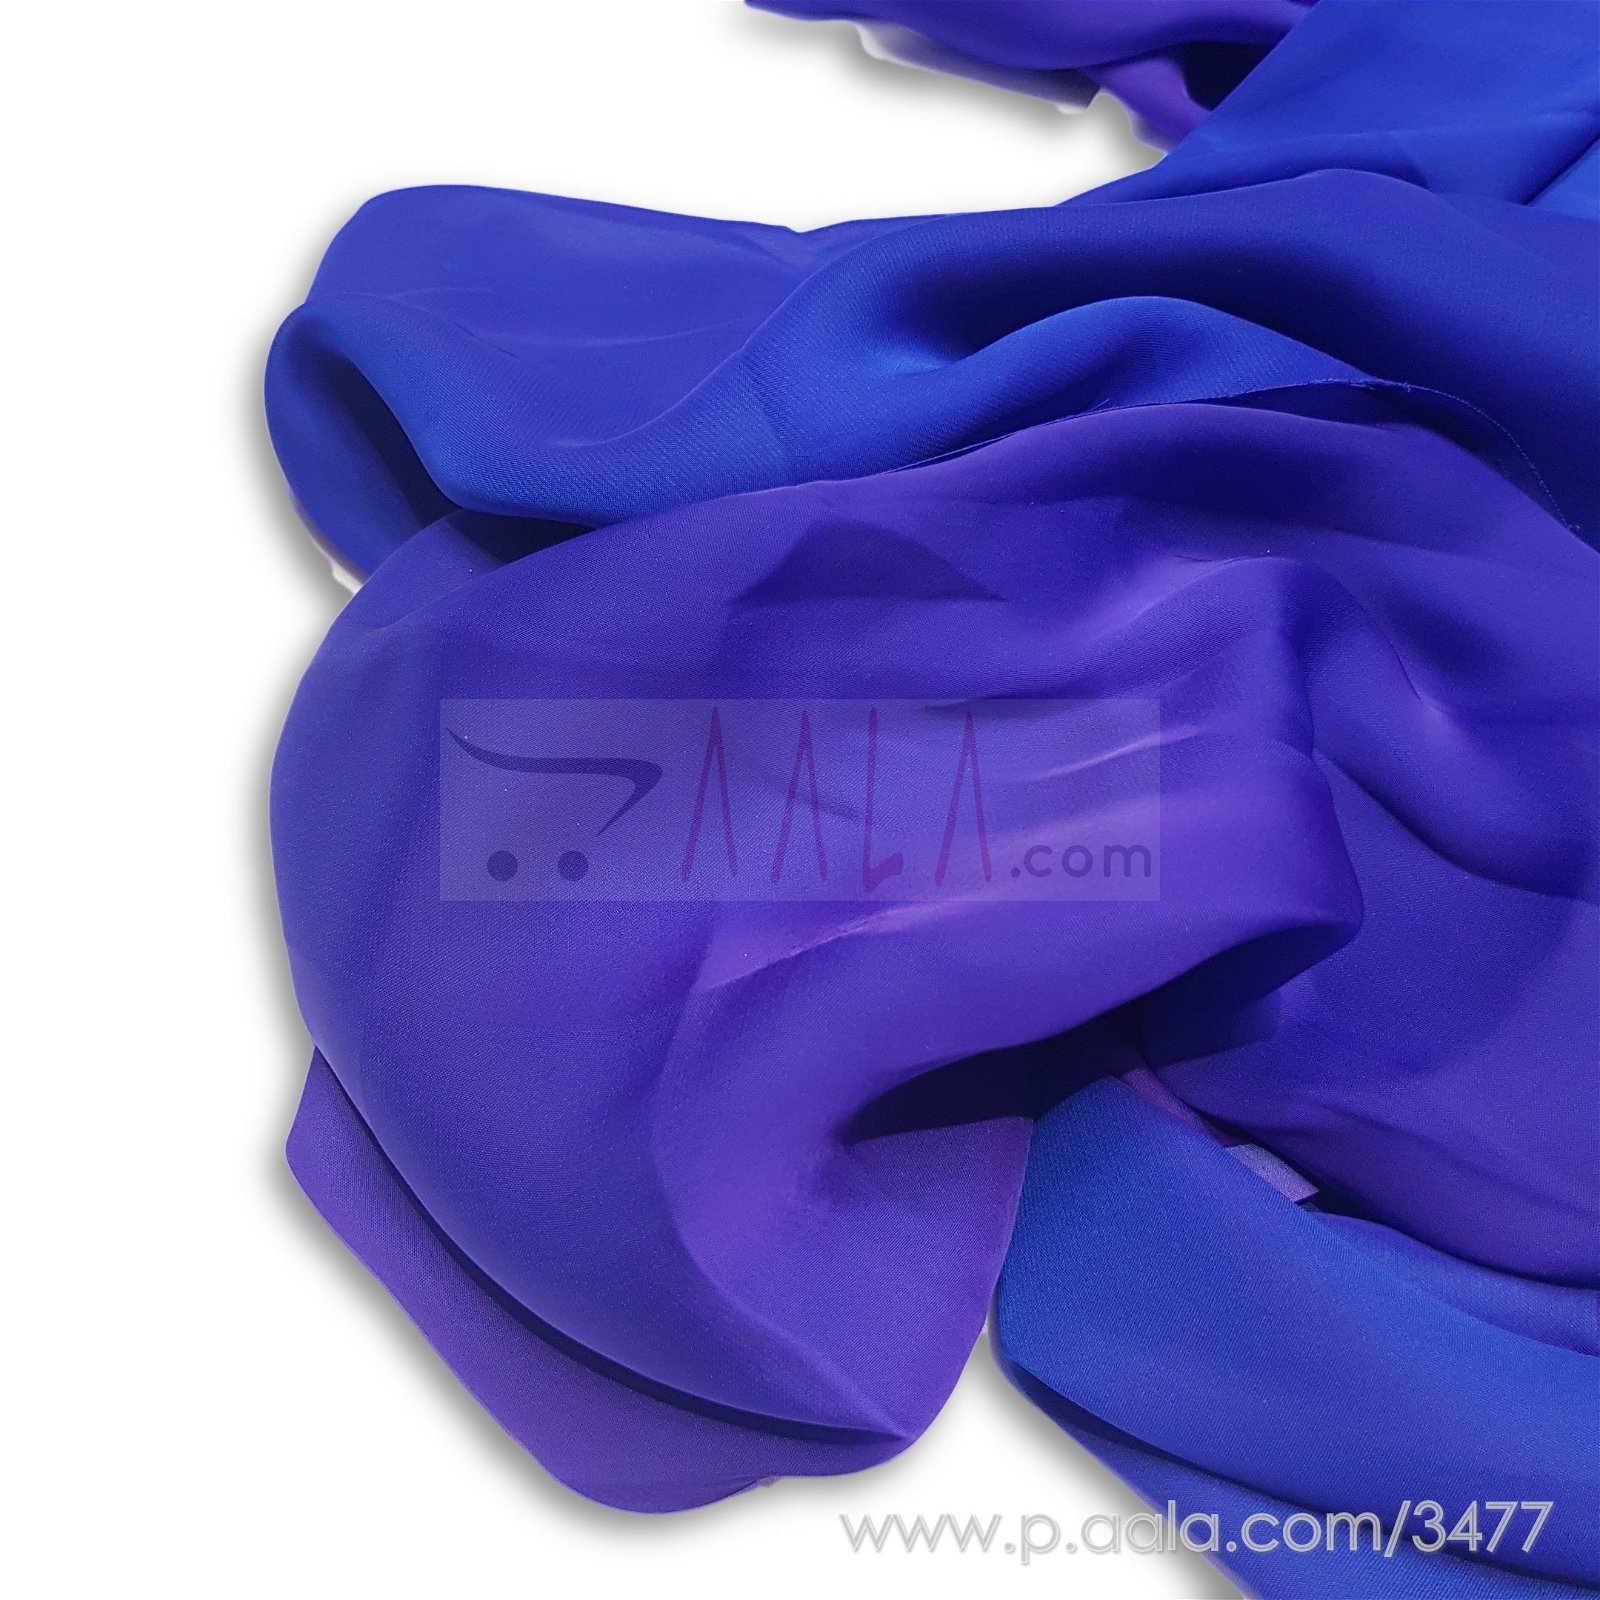 Blended Flat Chiffon Poly-ester 44 Inches Dyed Per Metre #3477